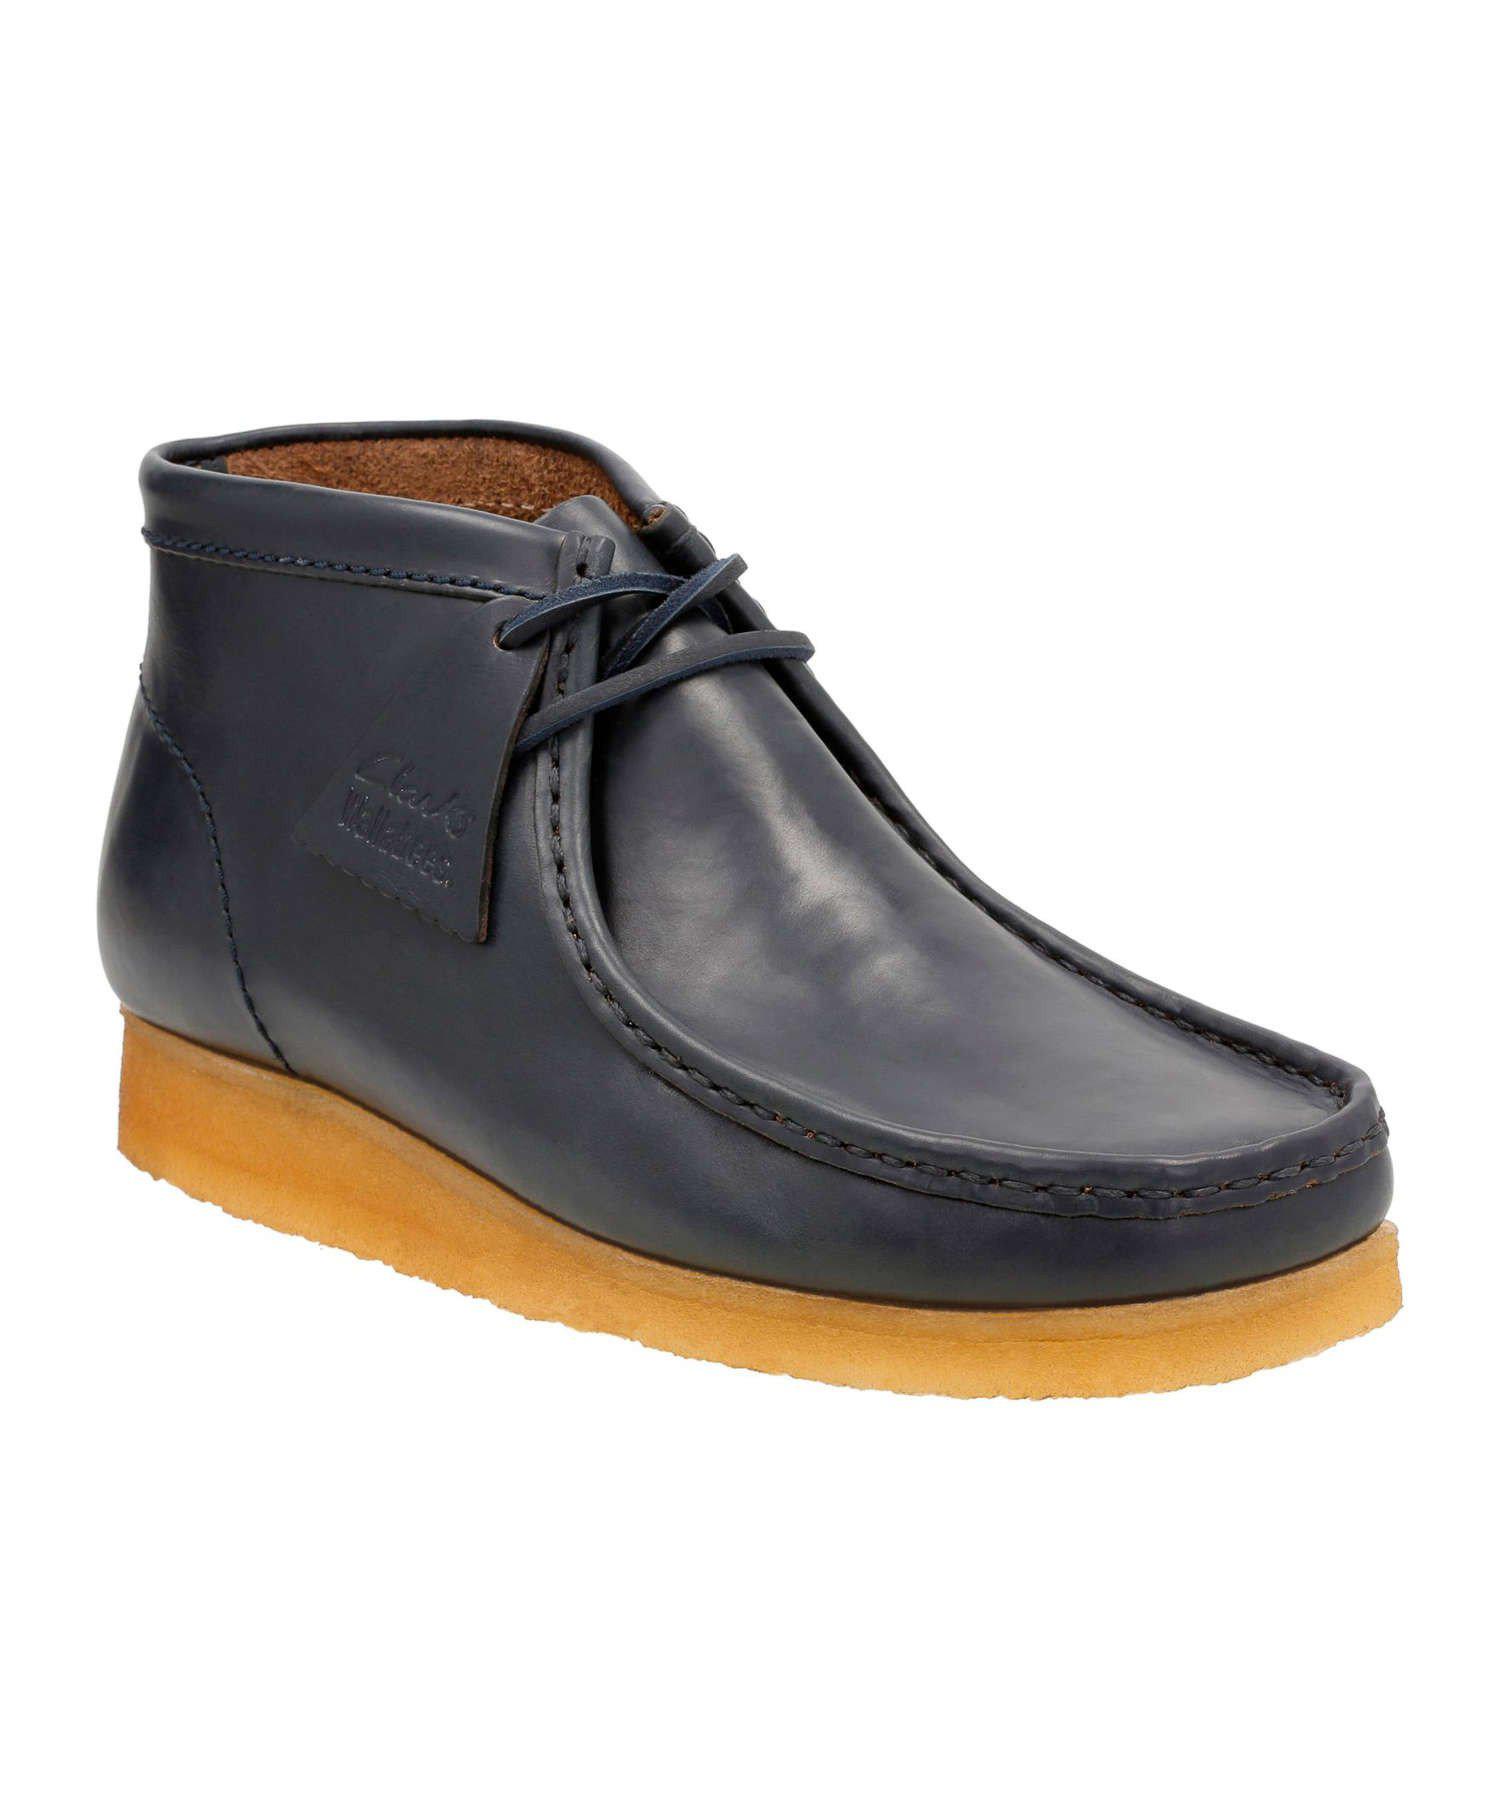 Navy Blue Wallabees Clearance, SAVE 55% - lutheranems.com